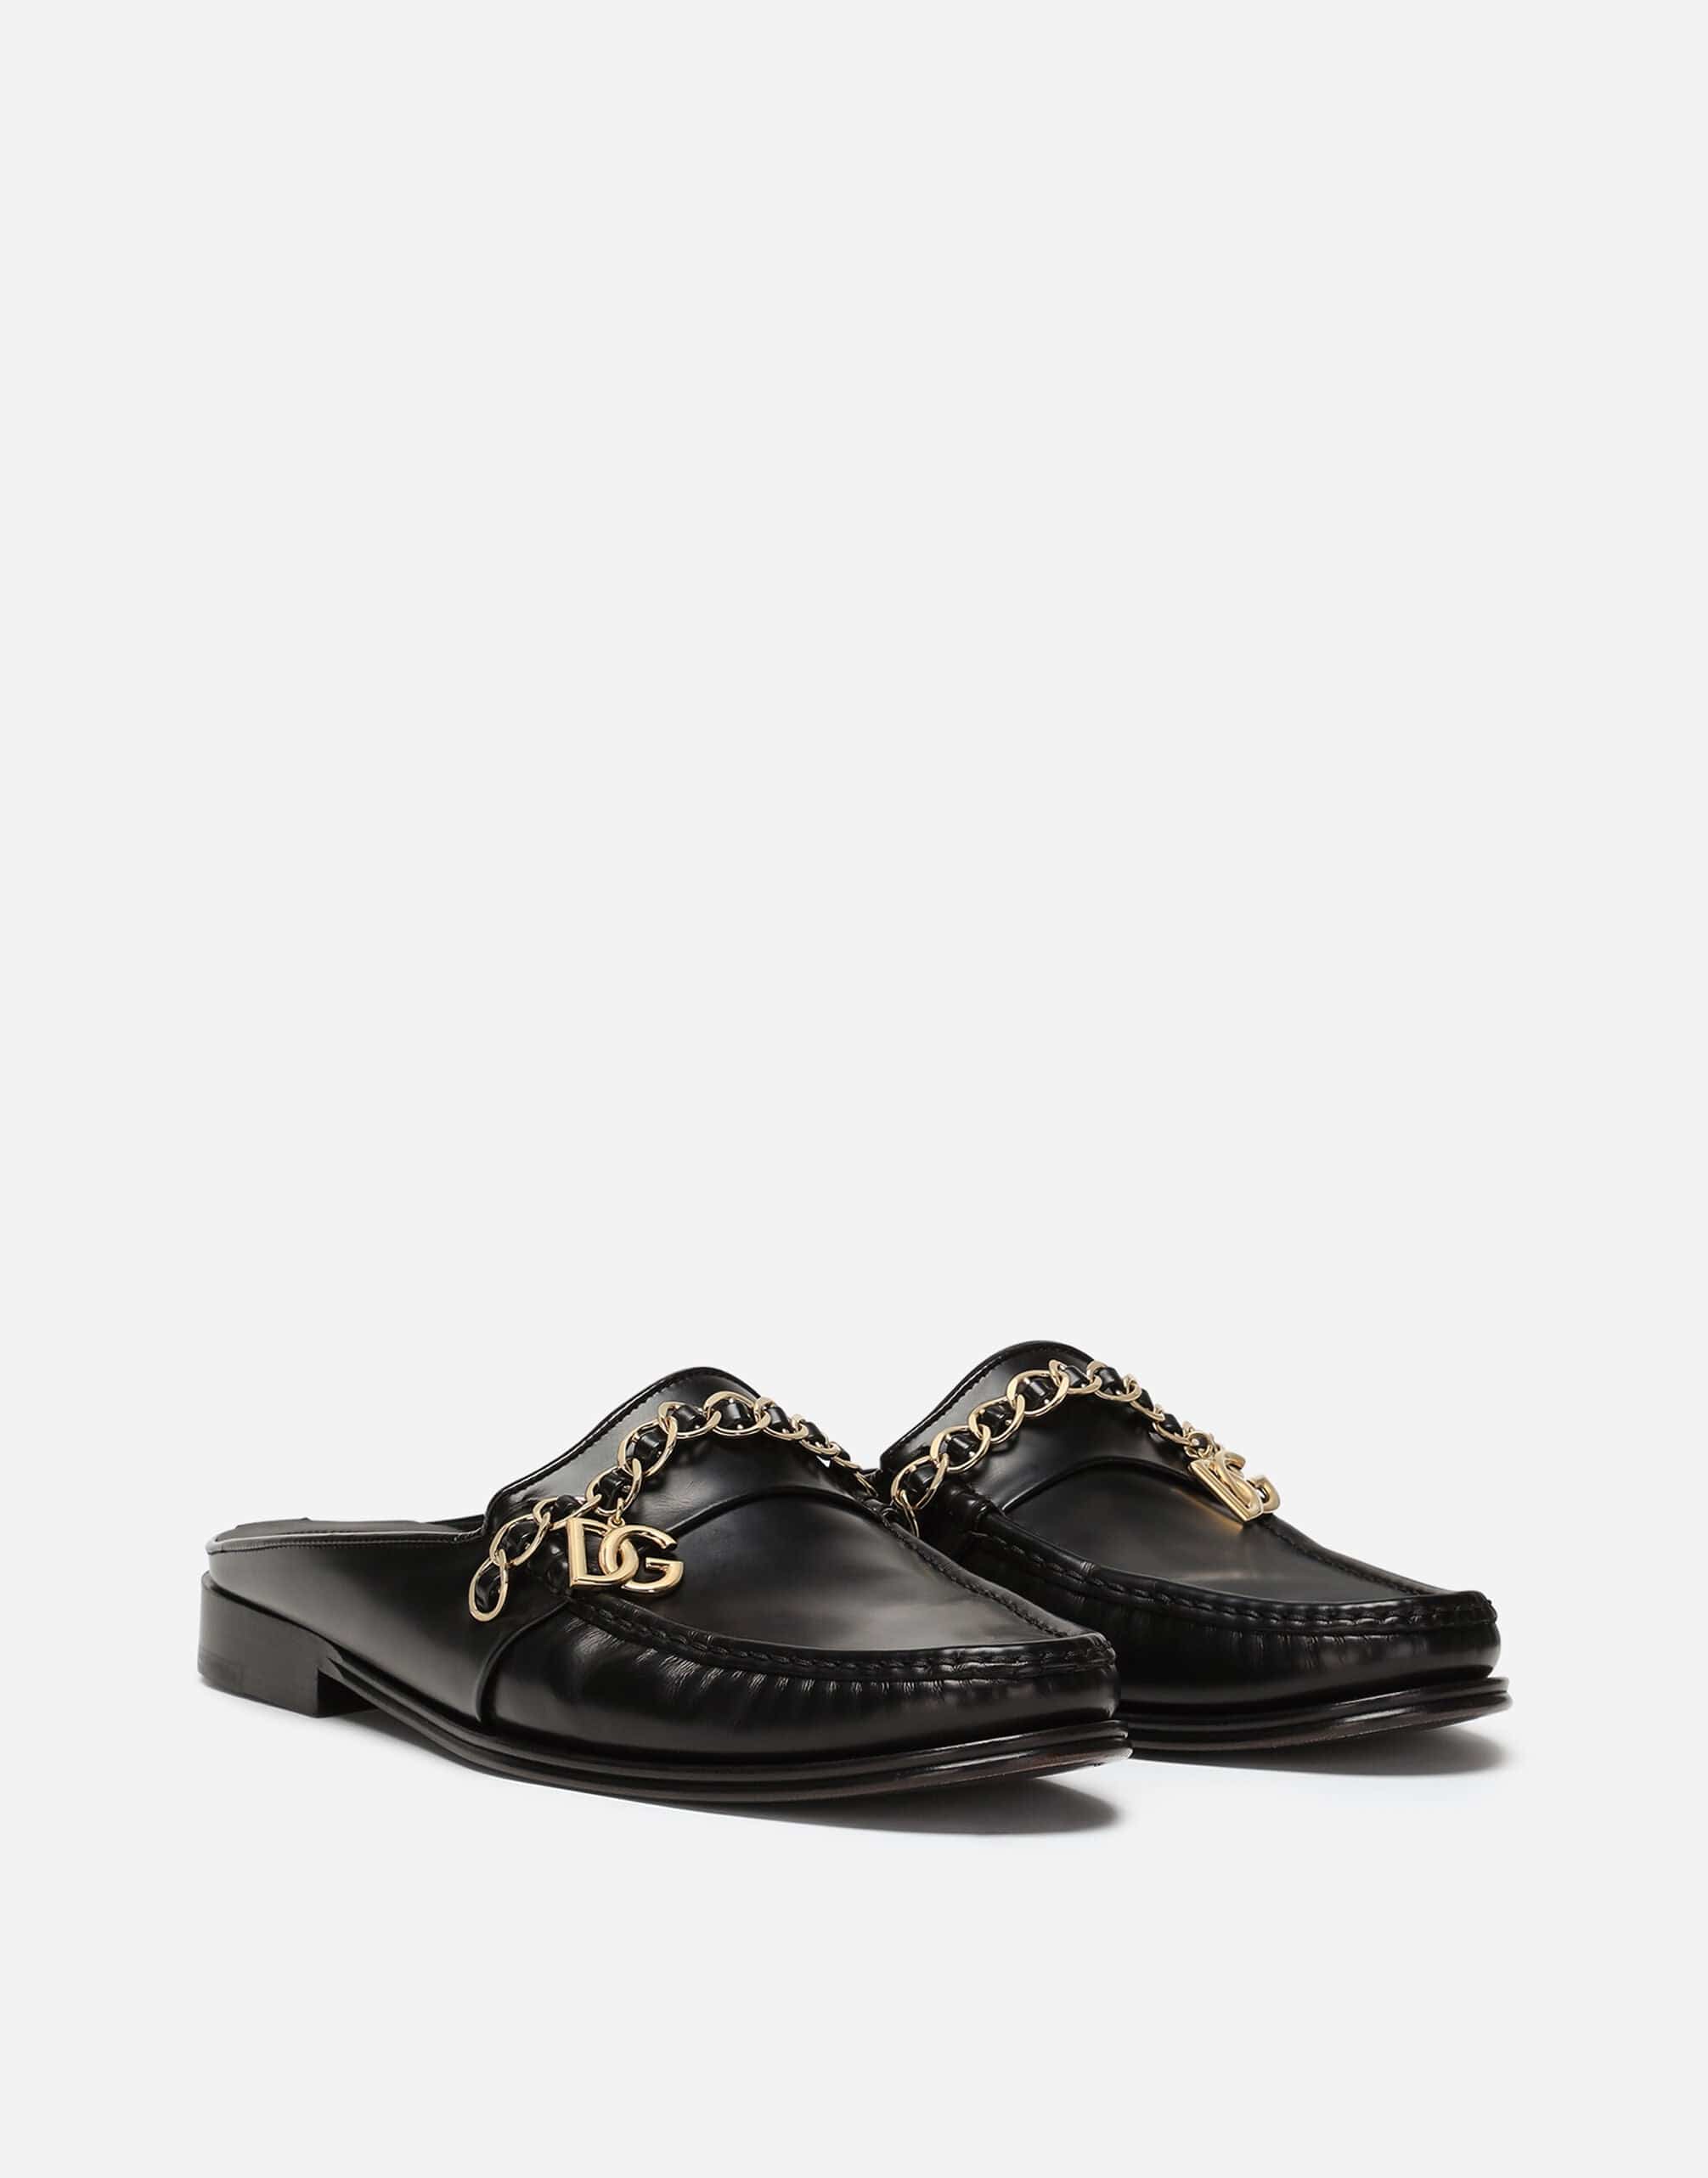 Dolce & Gabbana Visconti Leather Slippers